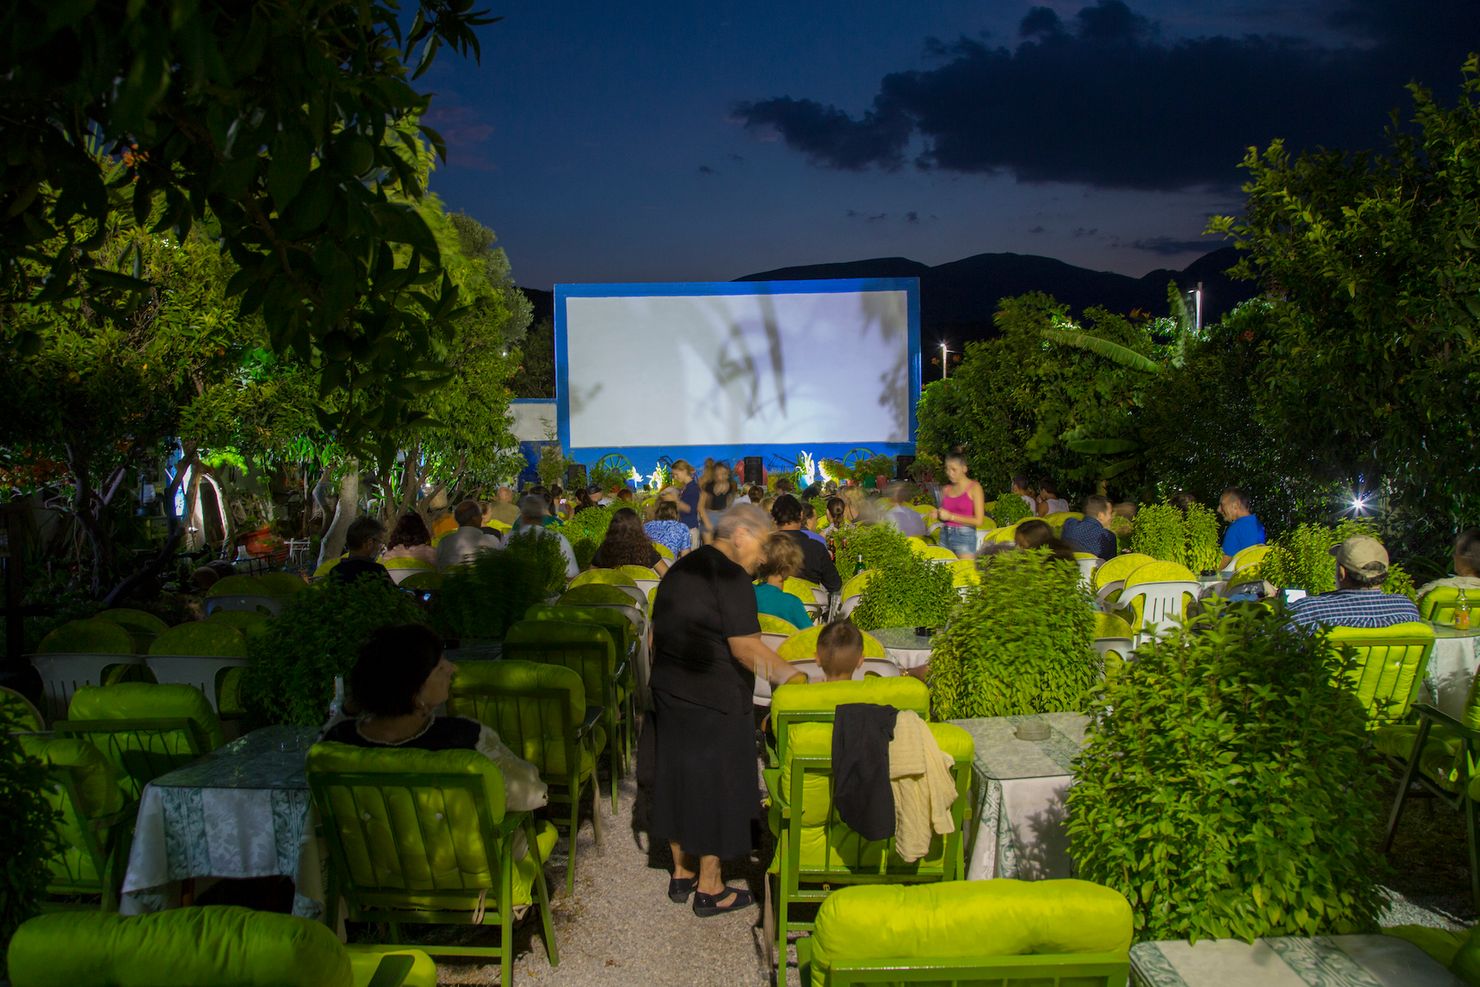 a narrow open-air cinema with seats place in between tall plants of basil and other flora. A large projection screen is at the back.